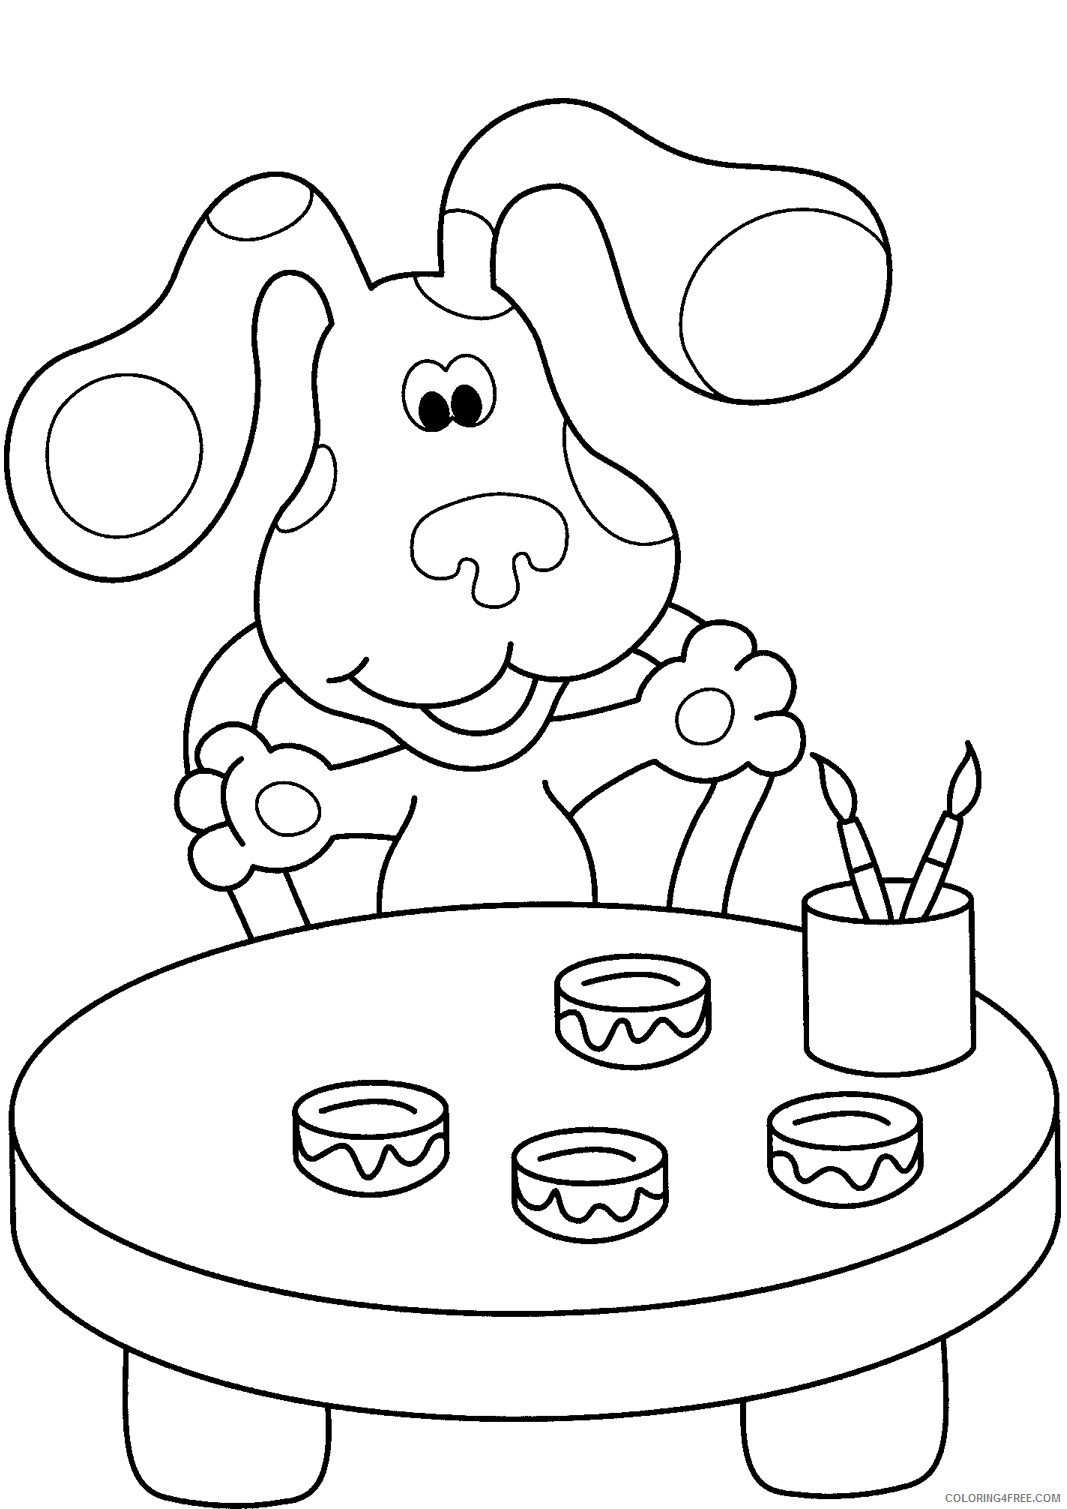 Blues Clues Coloring Pages TV Film Painter Blues Clues Printable 2020 00928 Coloring4free